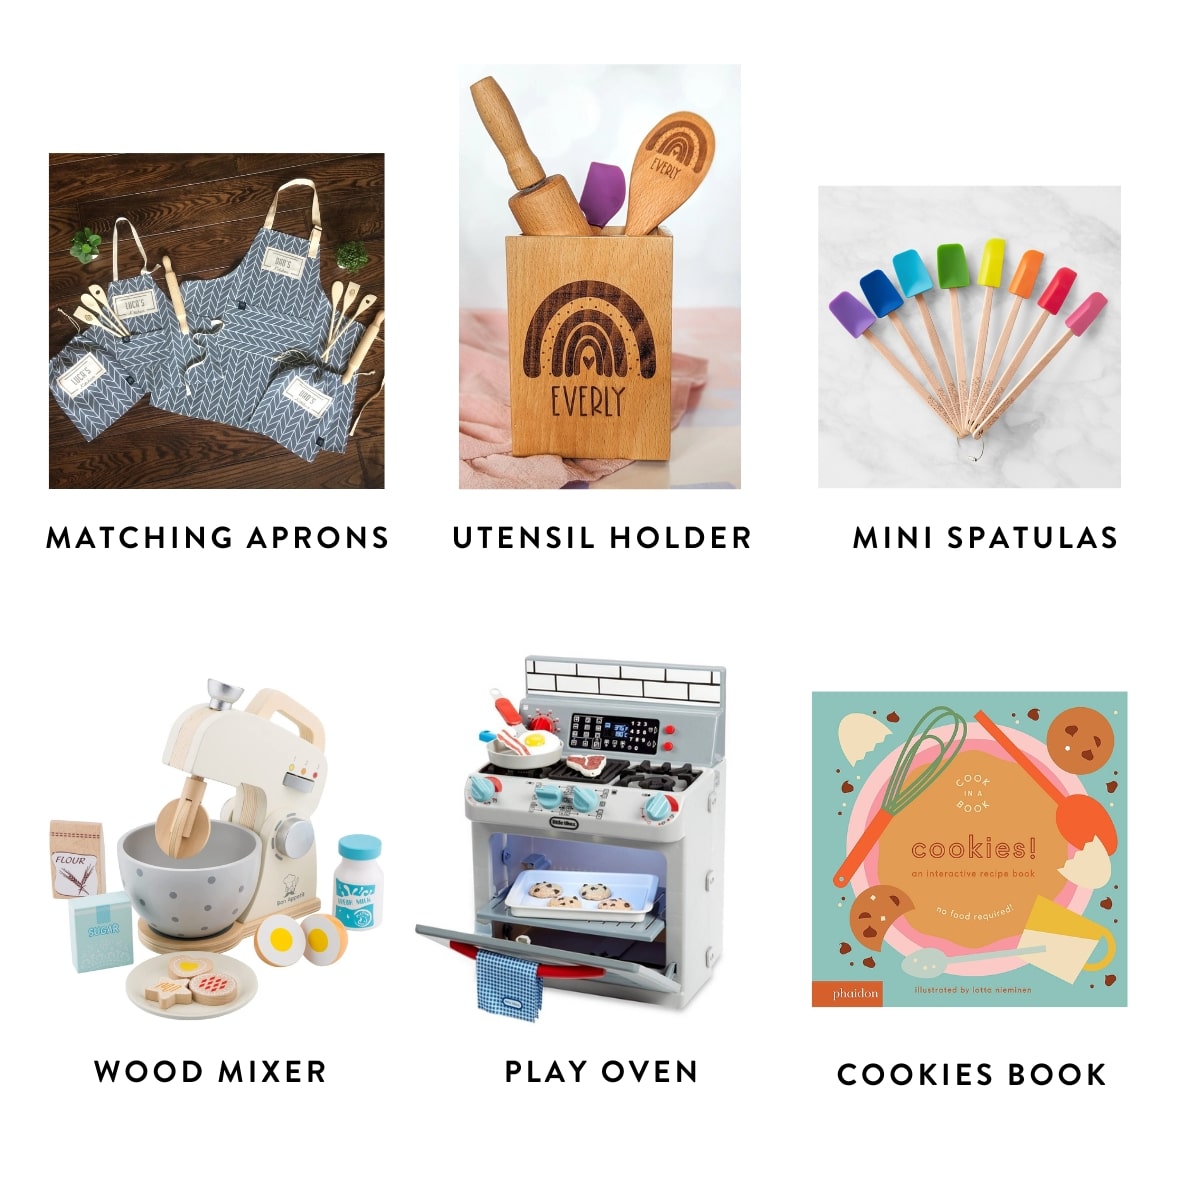 collage of graphics of different baking items including aprons, mini spatulas, wooden mixer, play oven, and more.